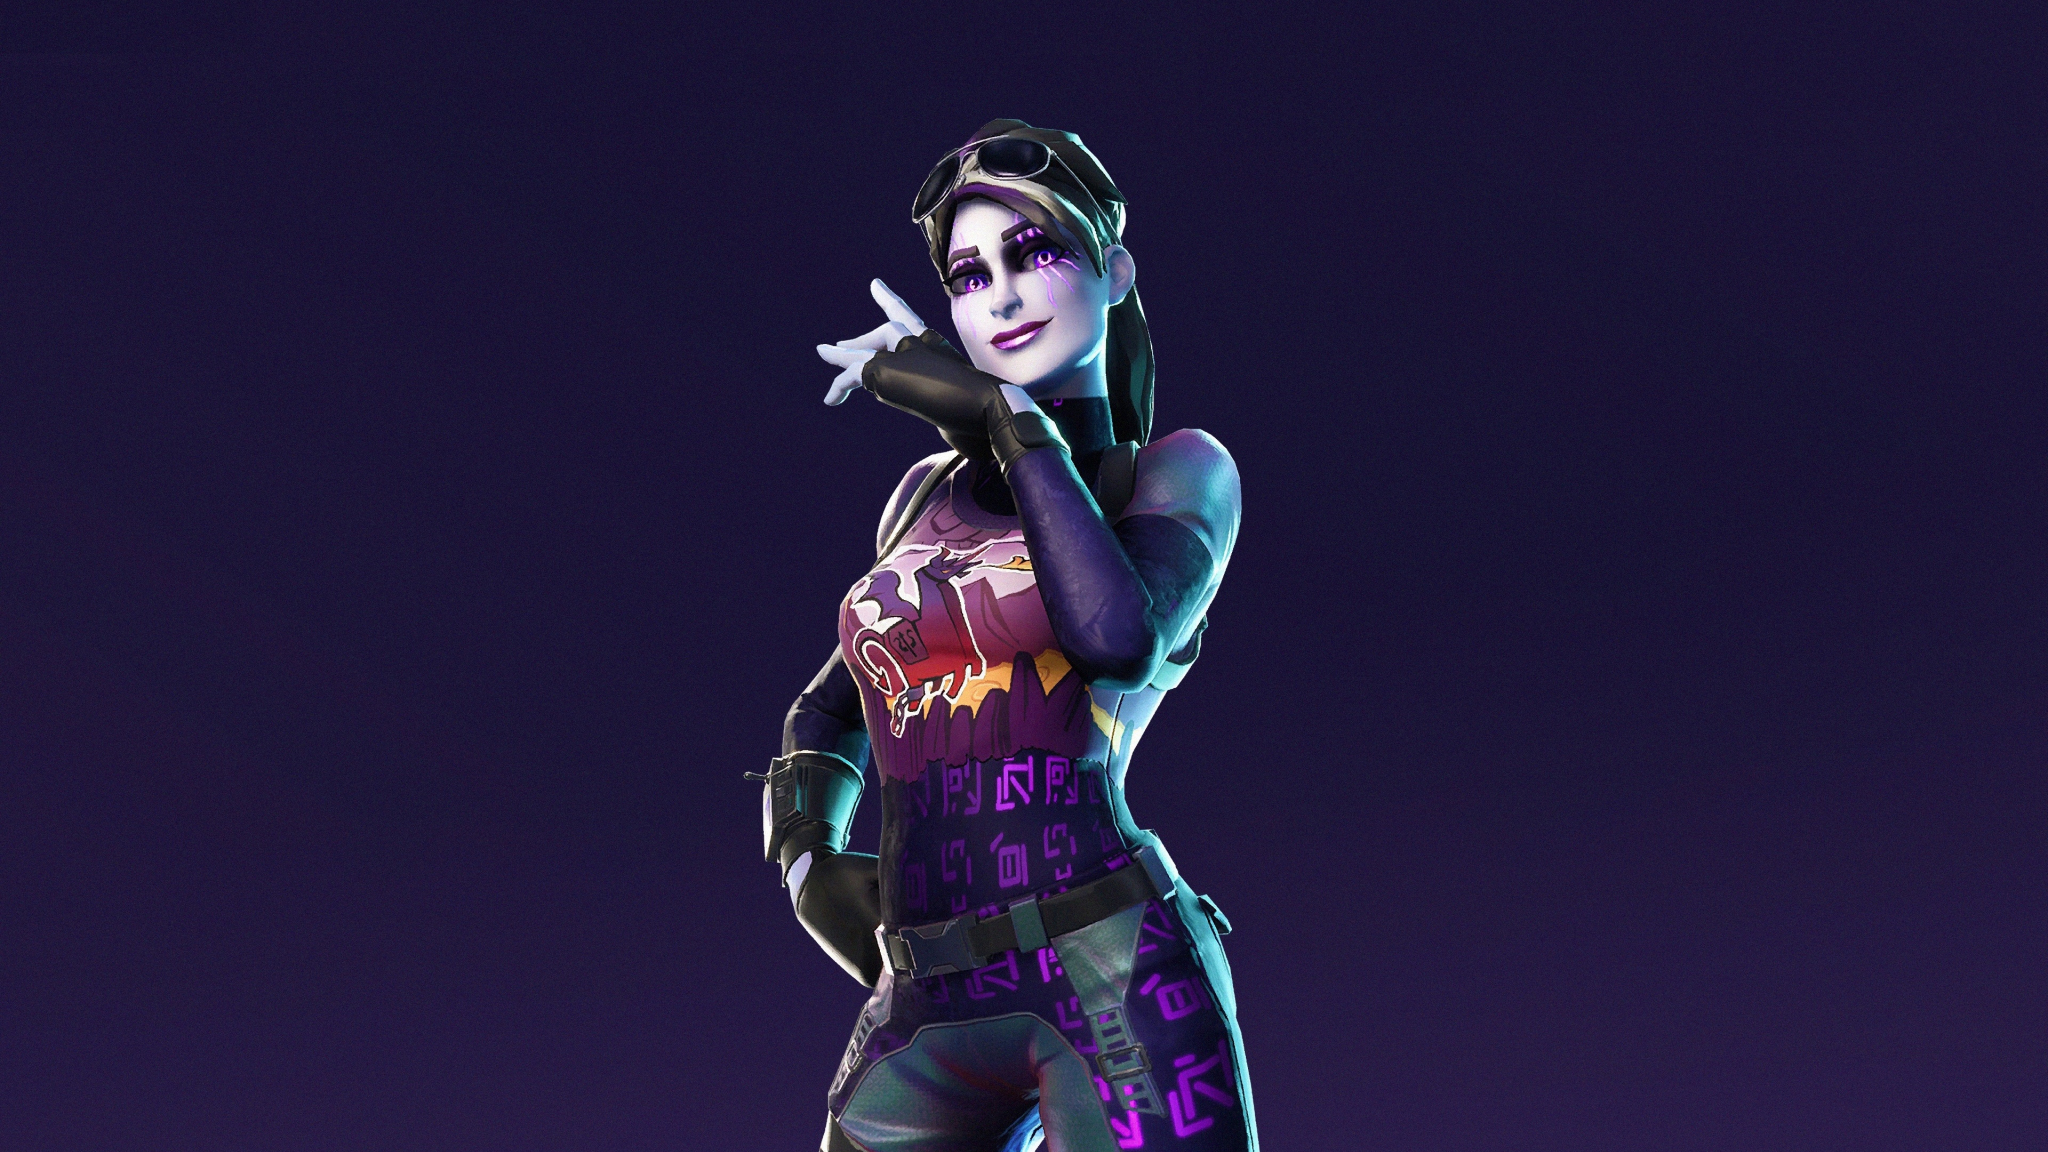 Download 2048x1152 Wallpaper Dark Bomber Fortnite Battle Royale Video Game Halloween Dual Wide Widescreen 2048x1152 Hd Image Background 15149